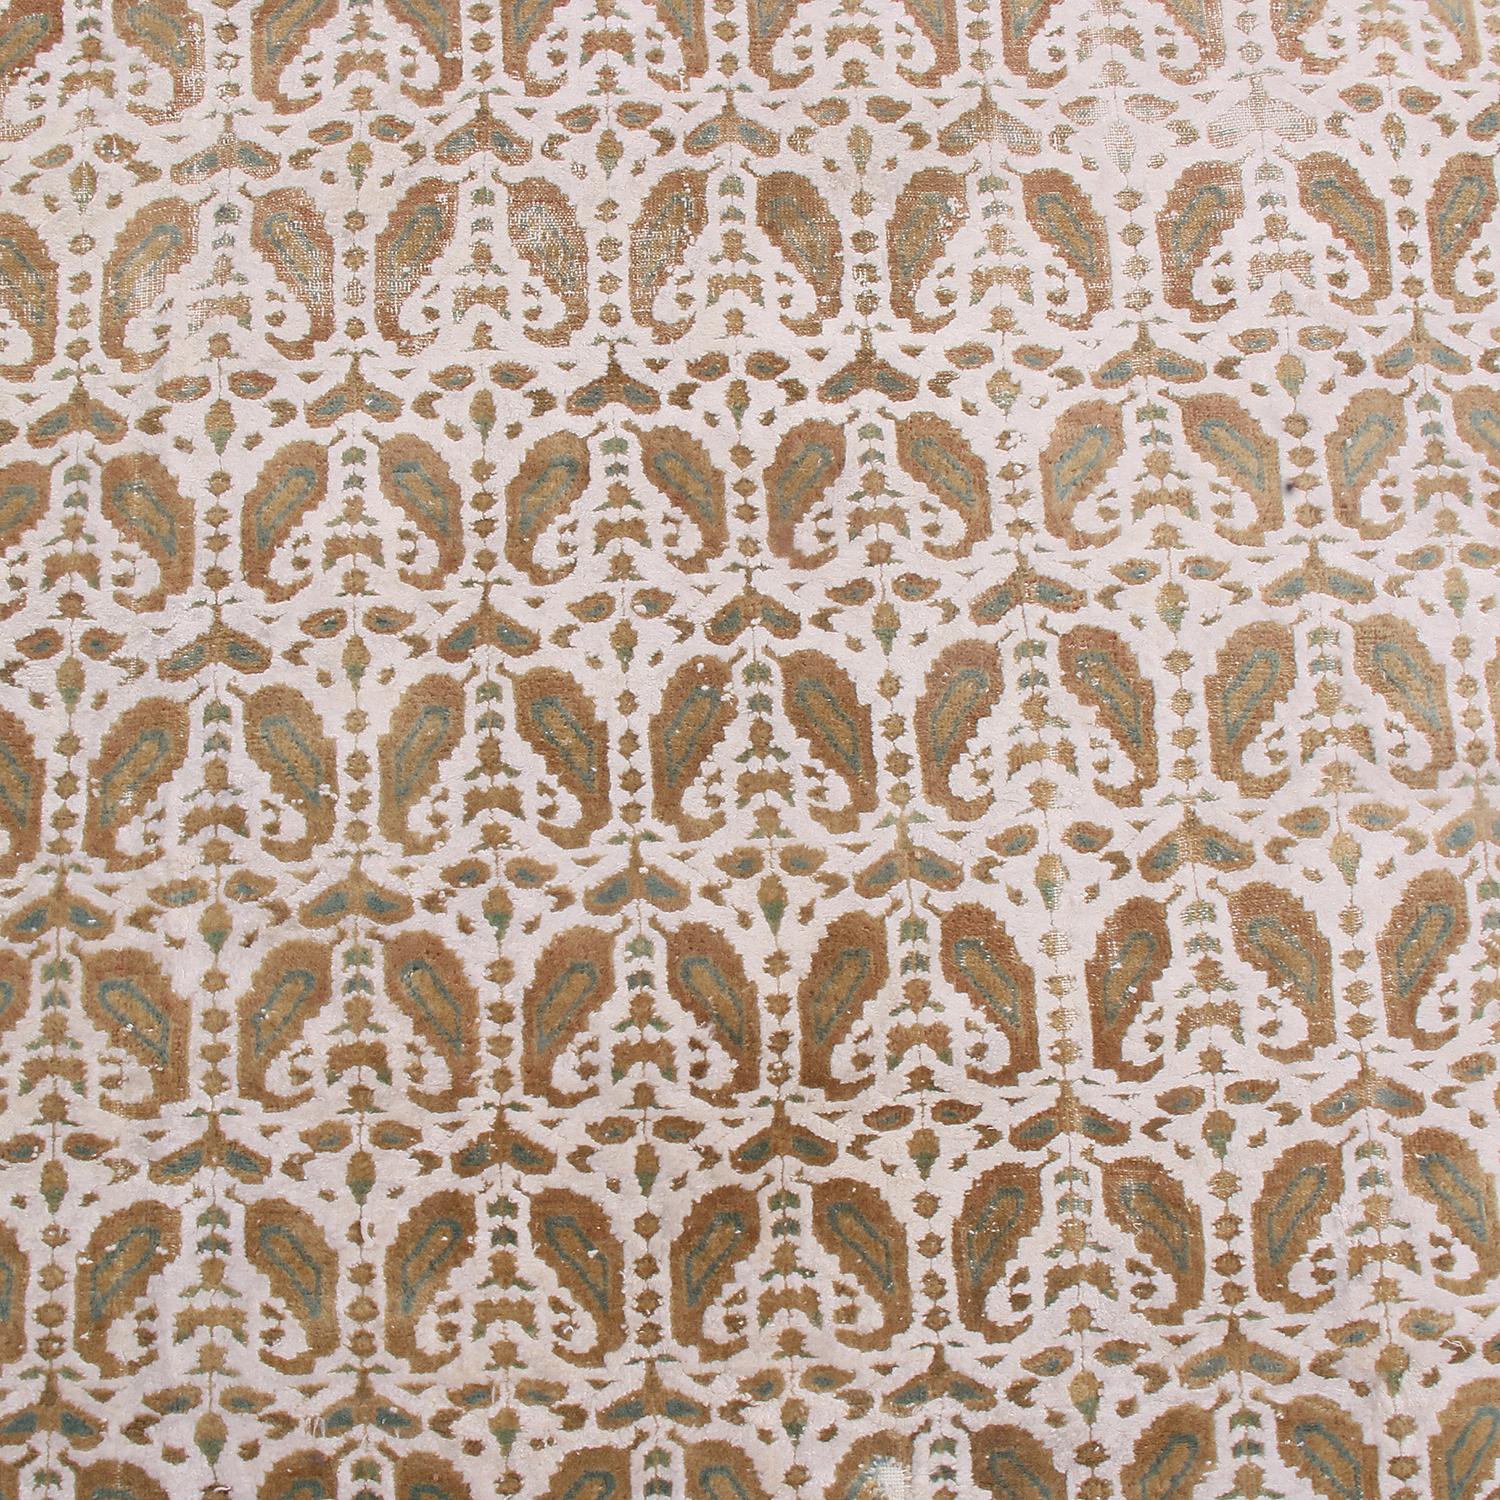 Late 19th Century Antique Boteh Paisley Beige and Off-White Wool Rug